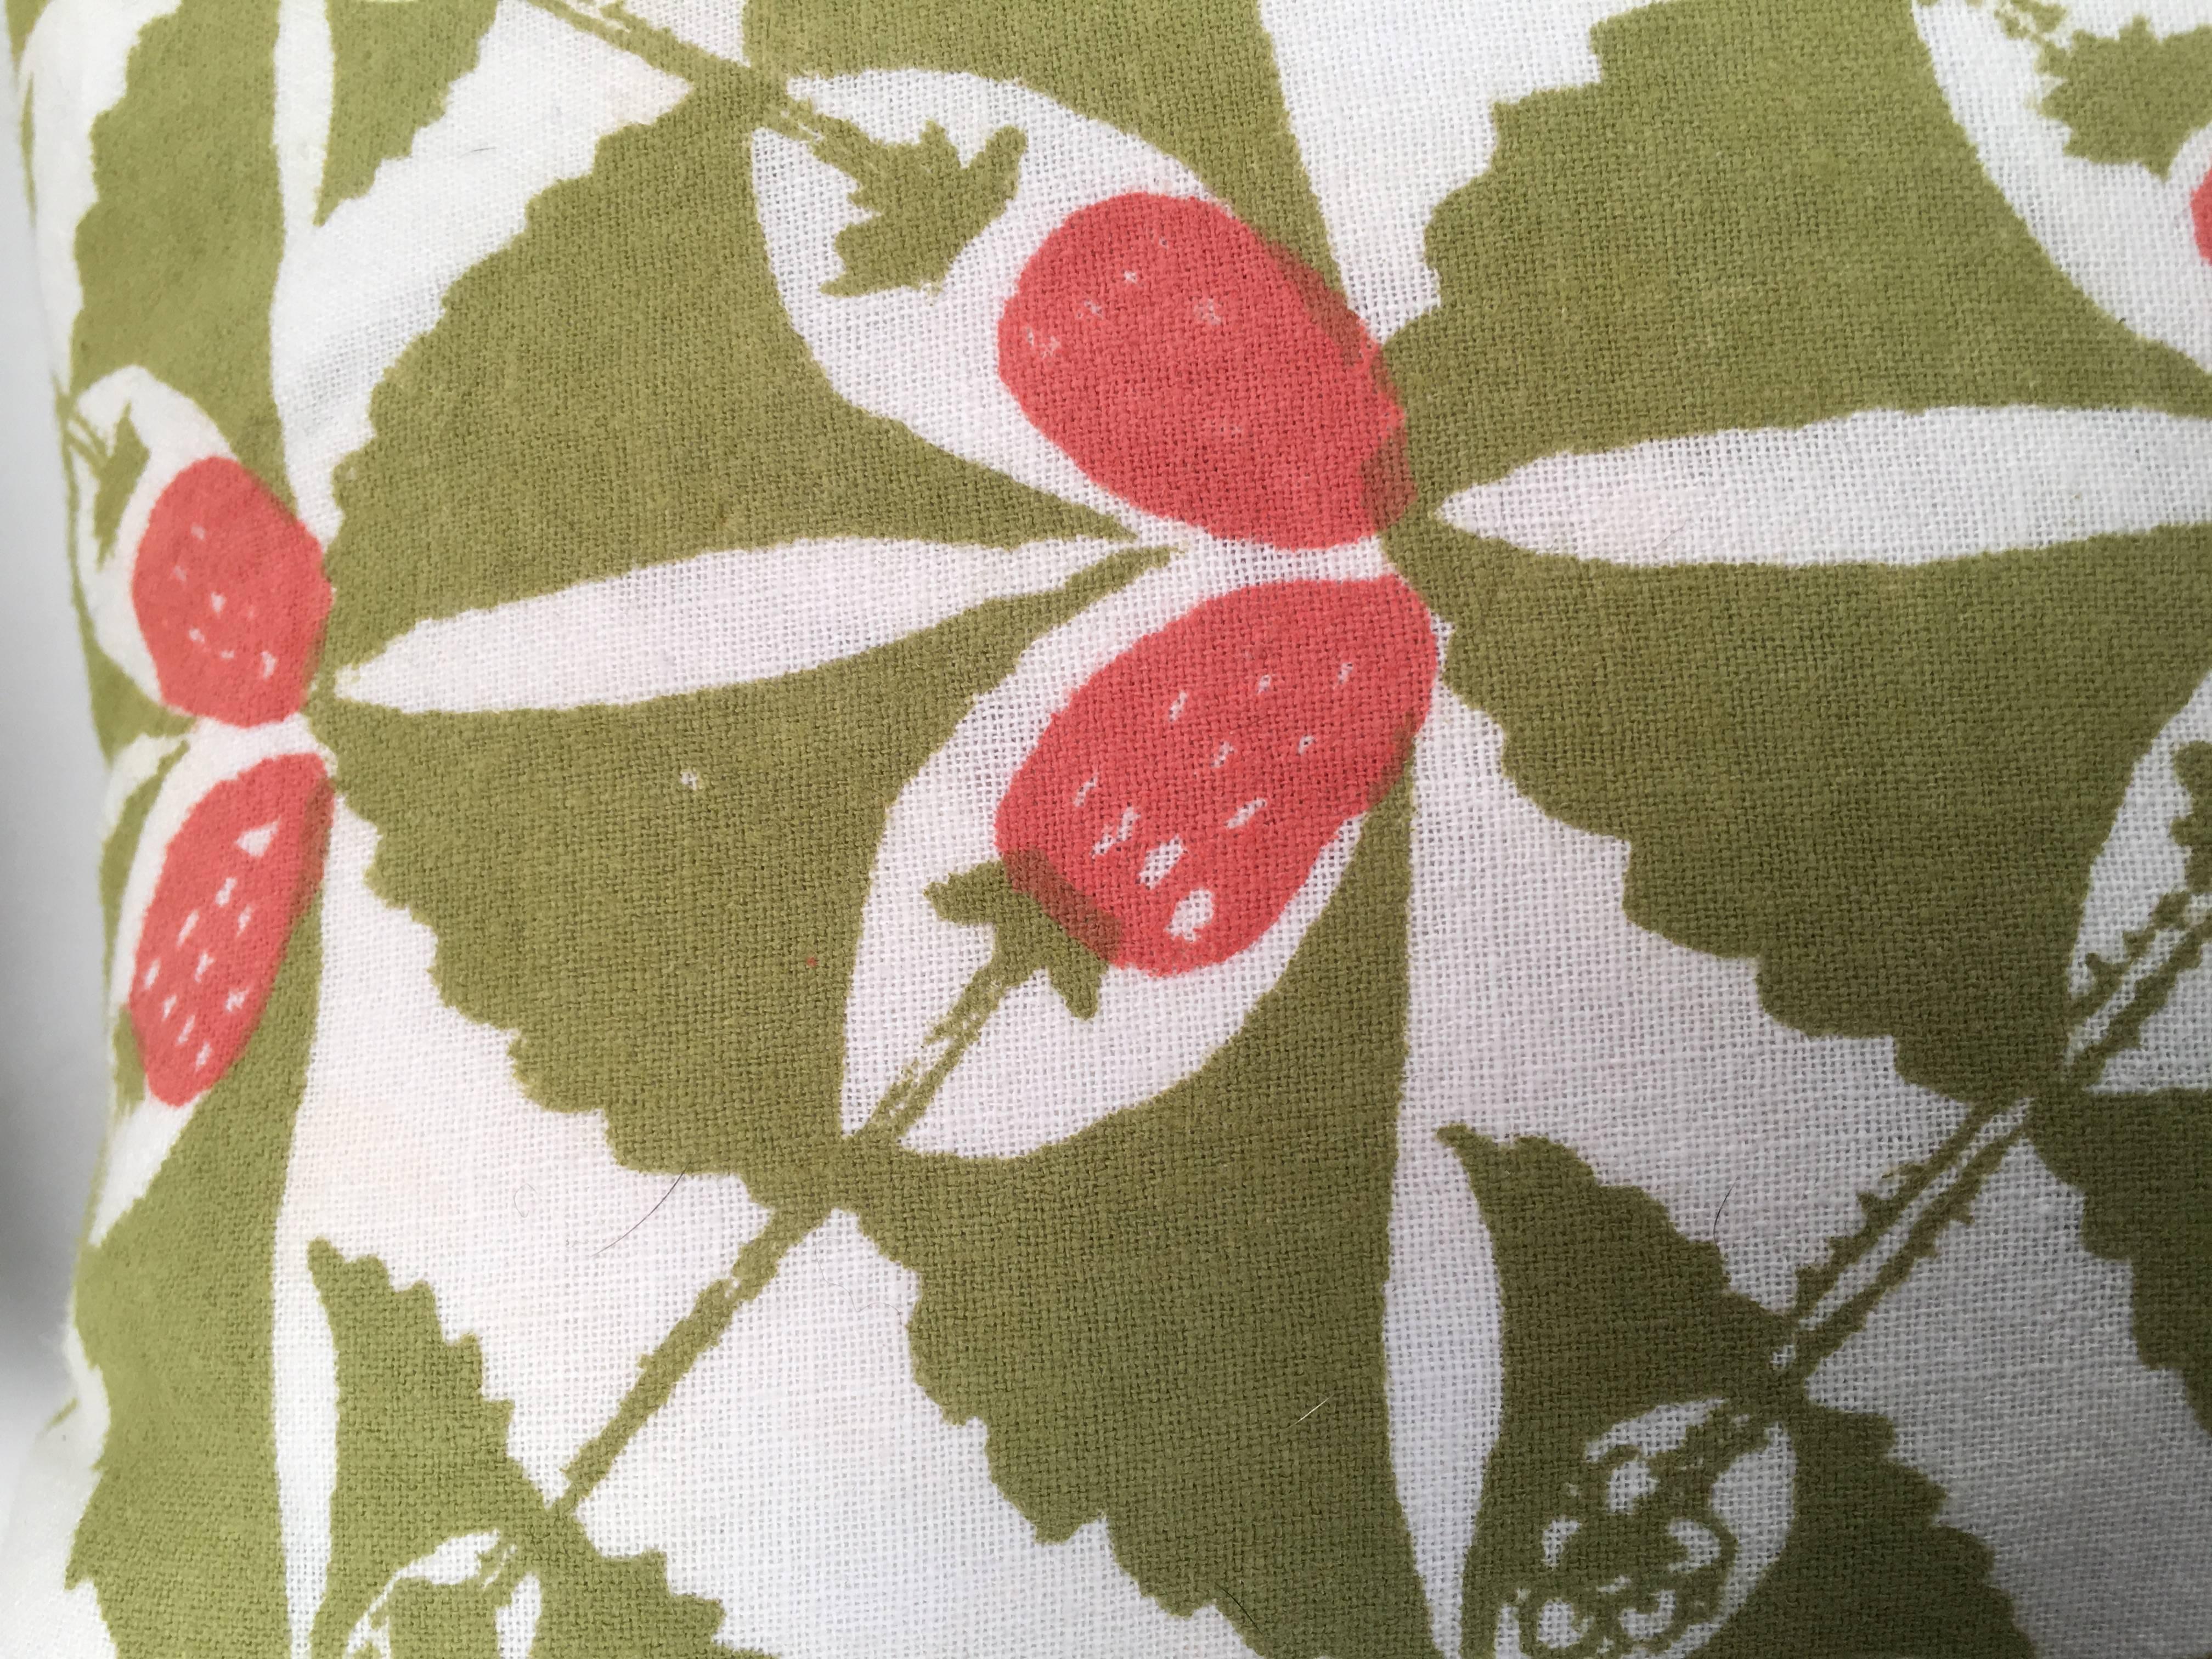 Hand-Crafted Hand Block Printed Strawberry Patch Pillow by the Folly Cove Designers